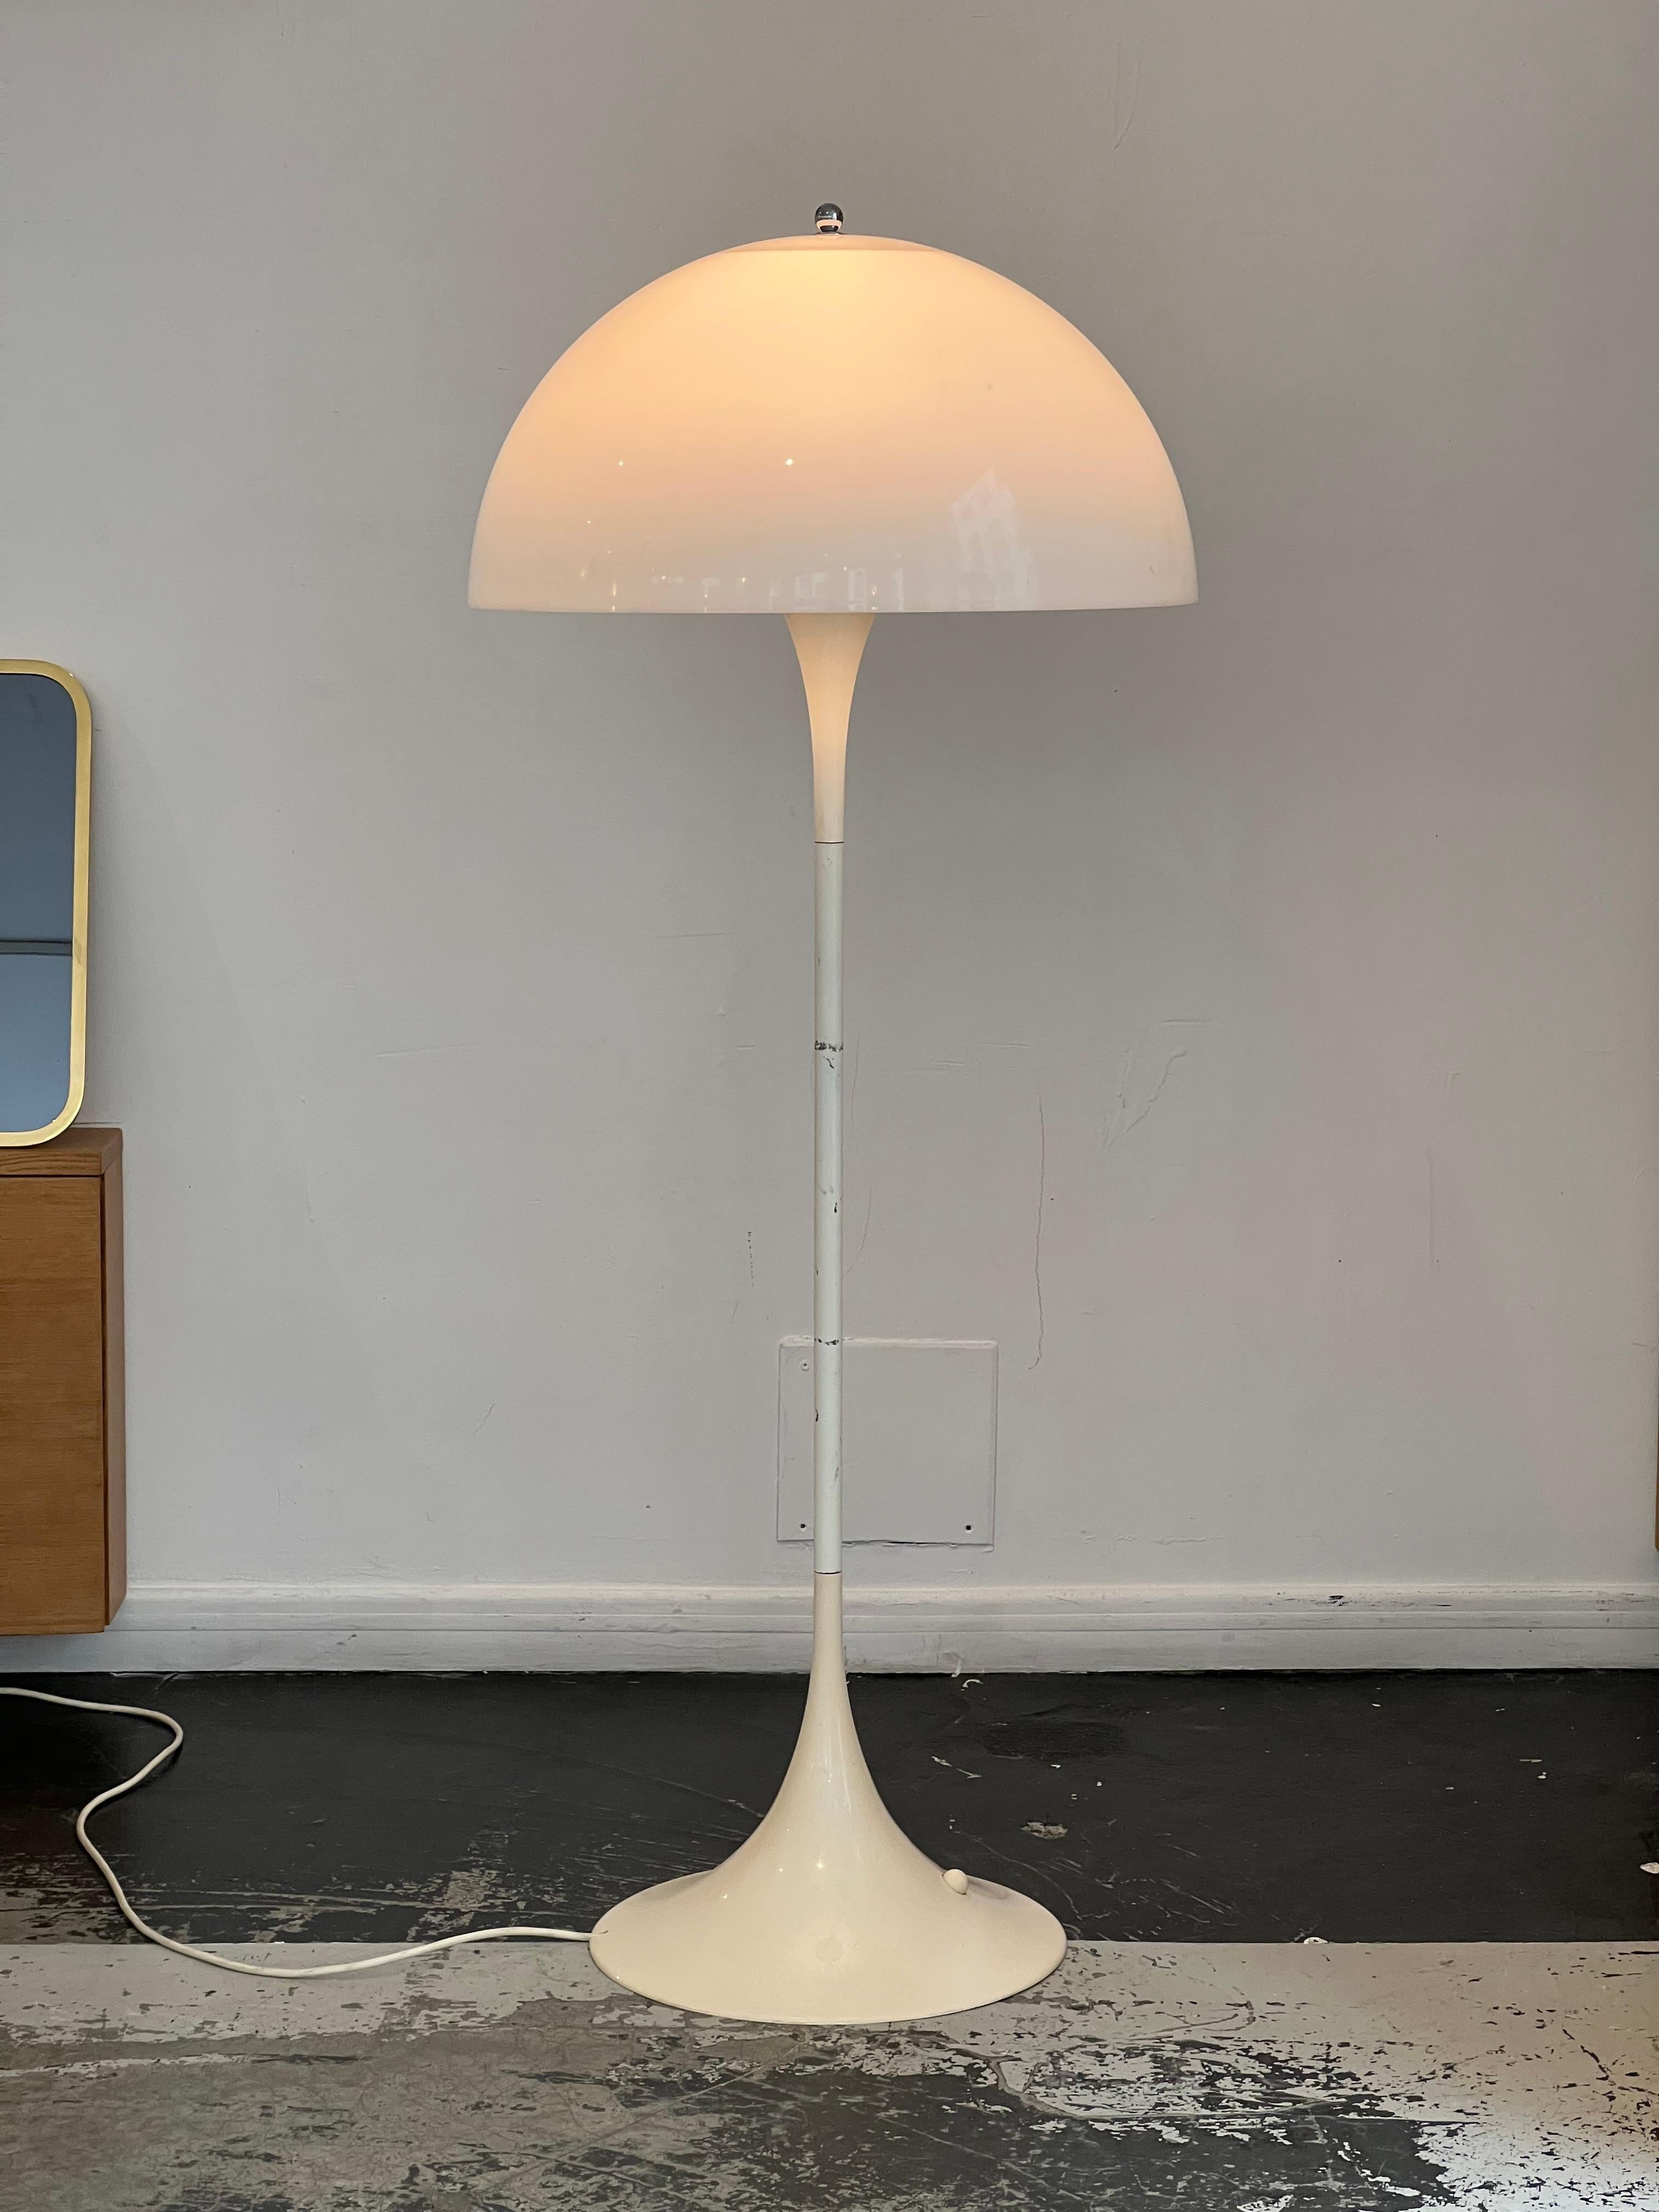 This floor lamp was designed by Danish designer Verner Panton for Louis Poulsen in 1971. This model is distinguished by its simplicity, whose organic form
emits a diffused light. The base is made of molded plastic with a white lacquered metal stem.